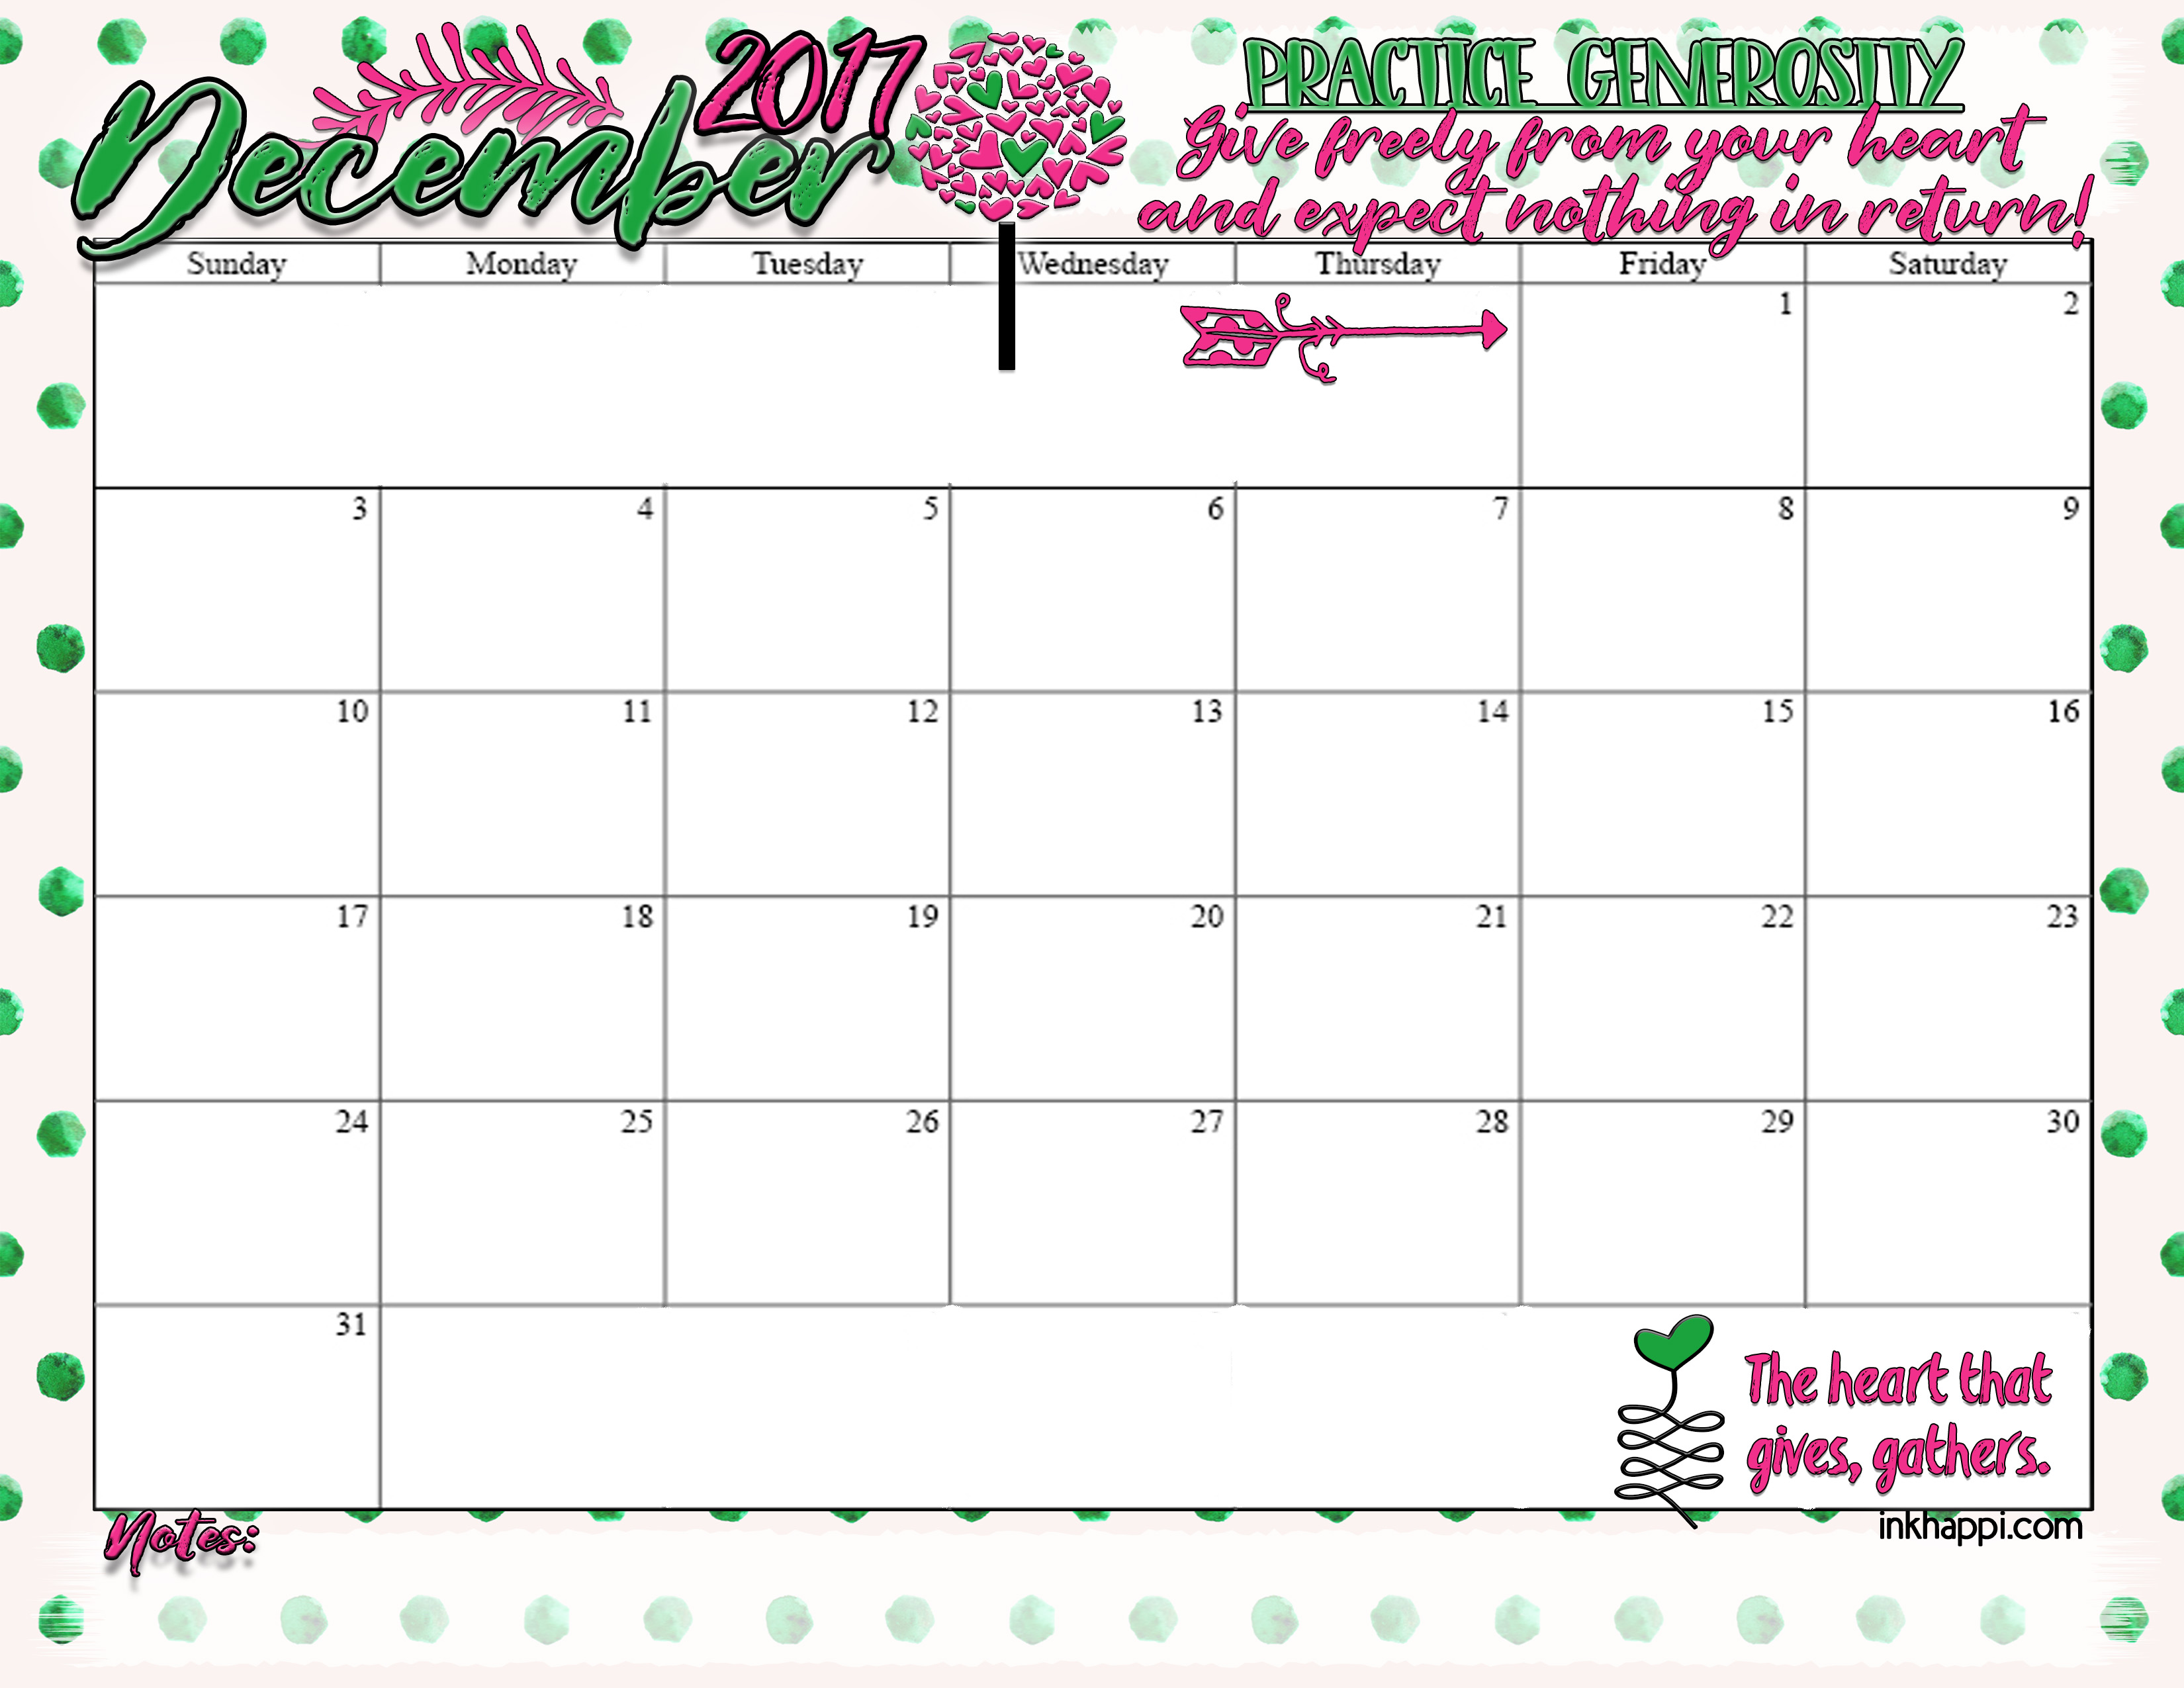 Summer Planning Calendars and ideas inkhappi